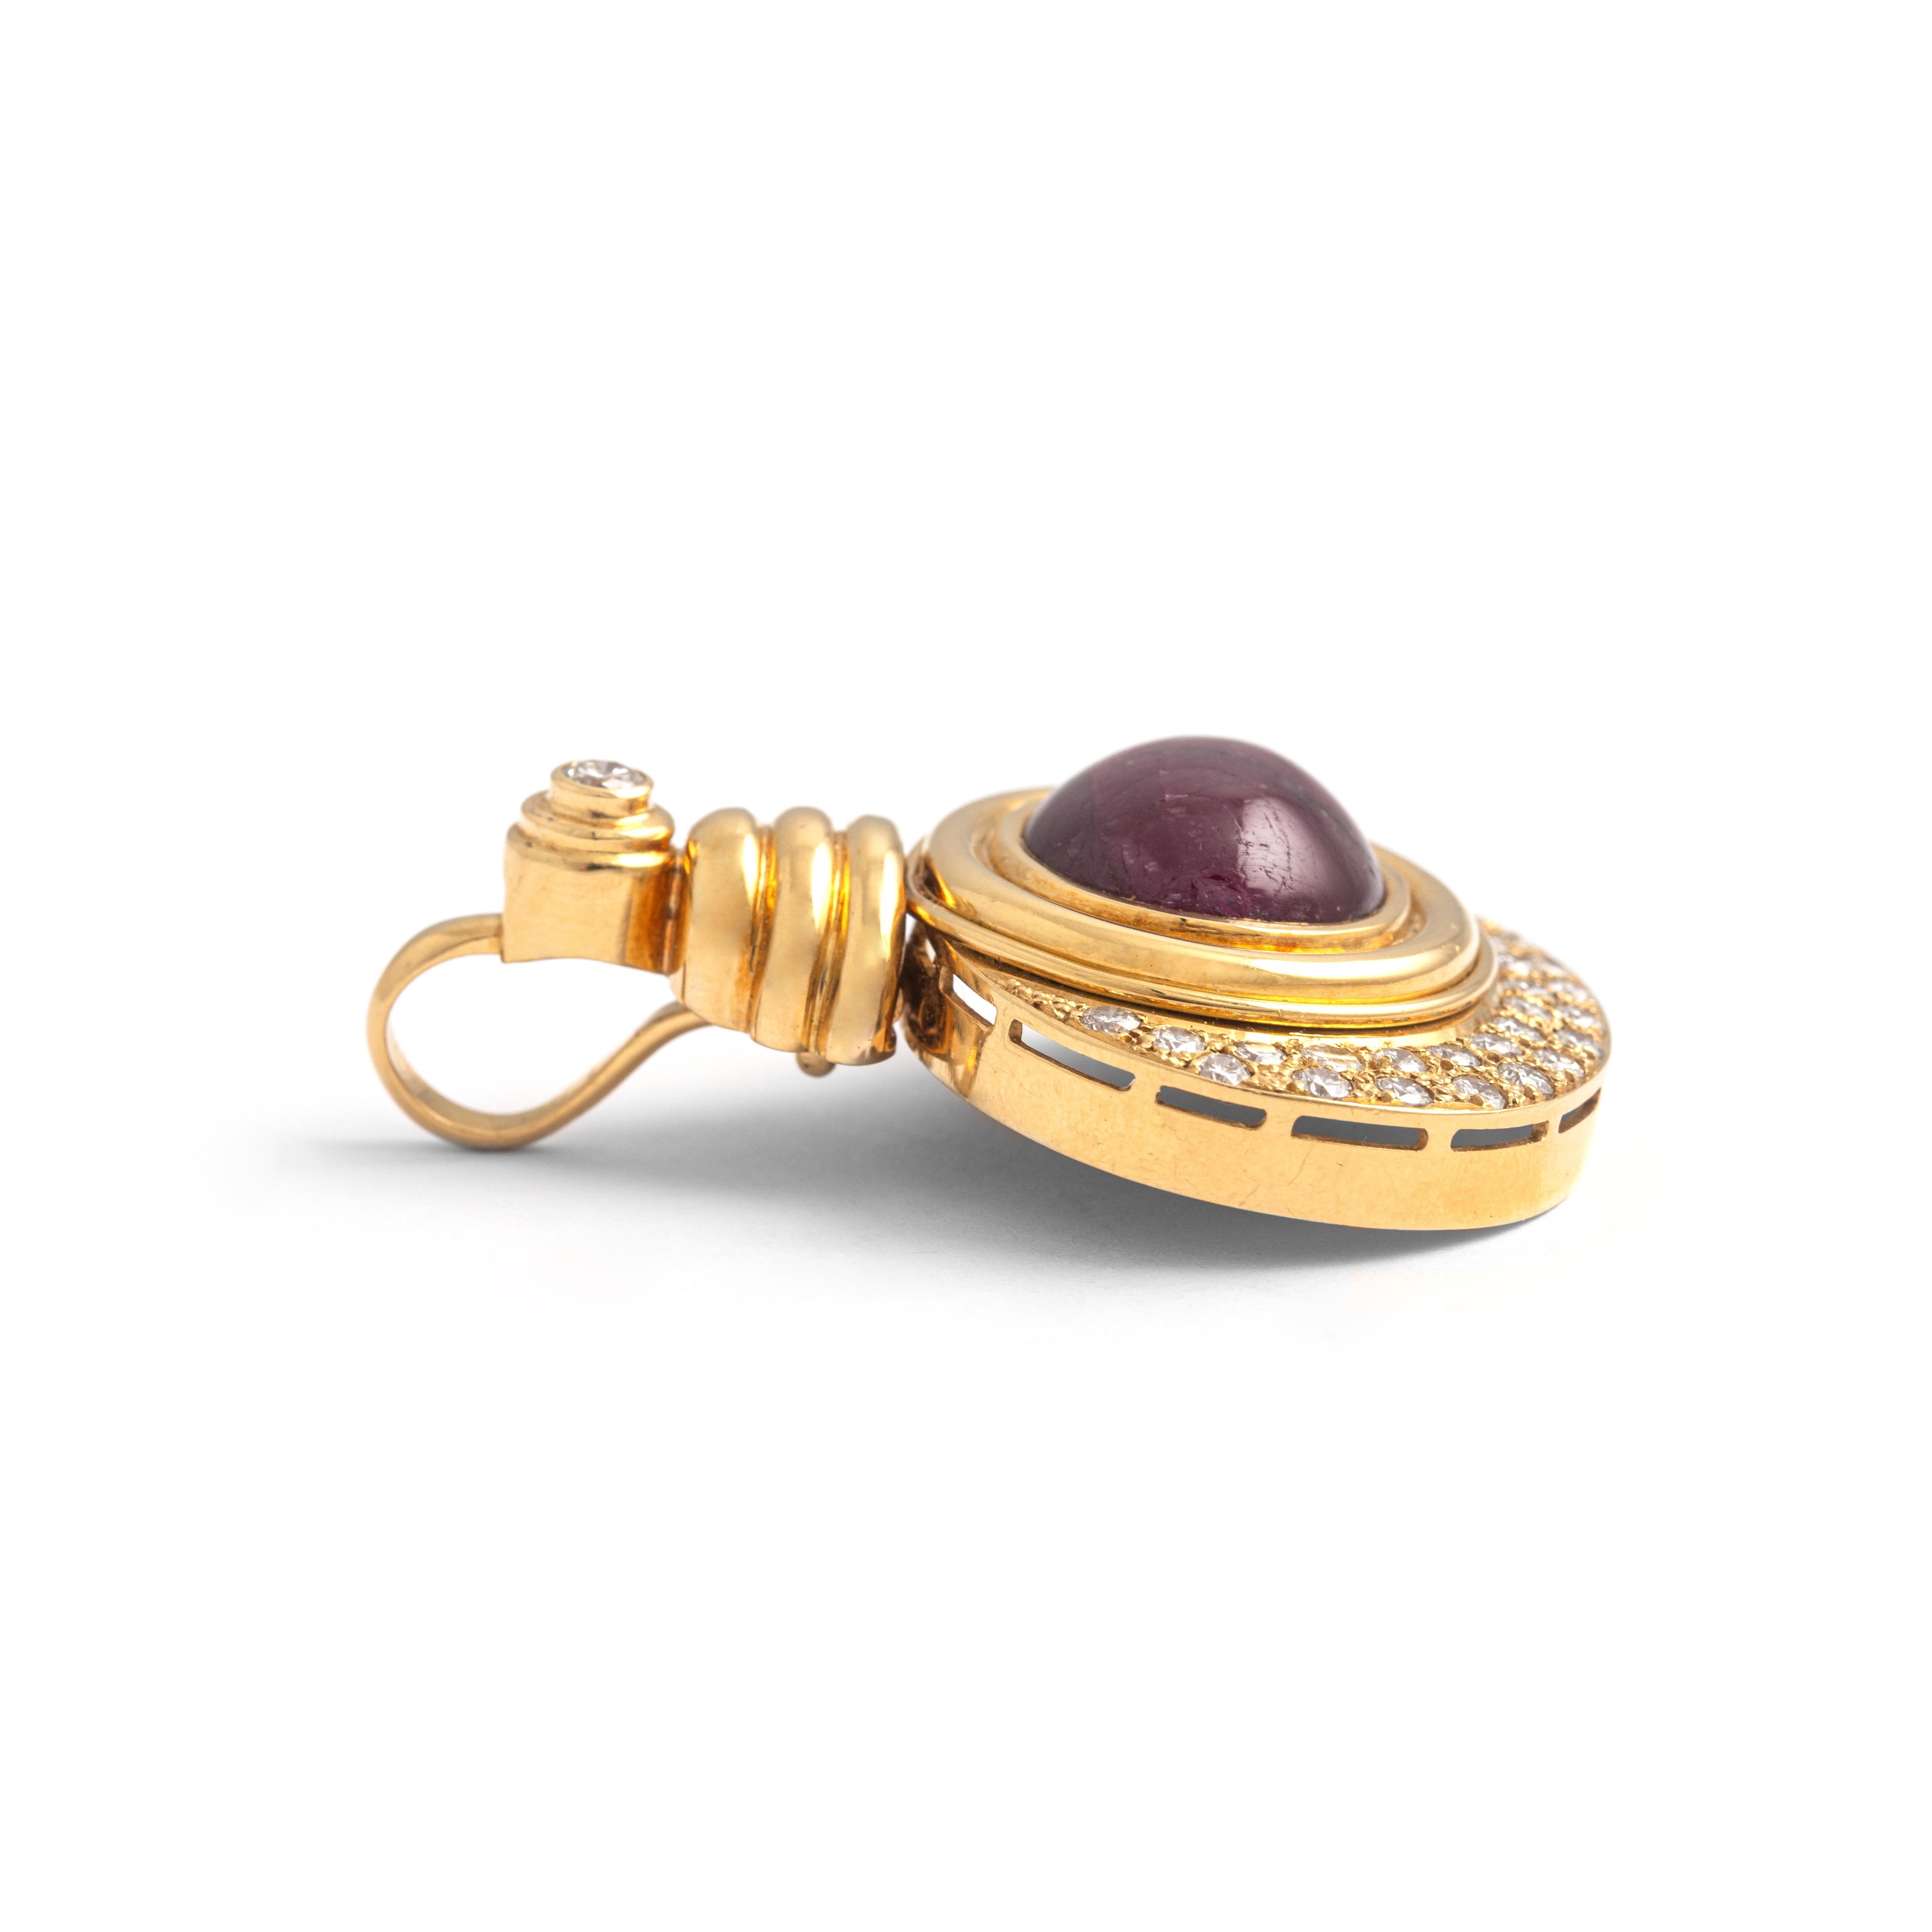 Cabochon Ruby Diamond Yellow Gold Pendant.
Late 20th Century.

Height: 5.00 centimeters.
Width: 3.40 centimeters.
Thickness: approx. 1.20 centimeters.

Total gross weight: 23.00 grams.